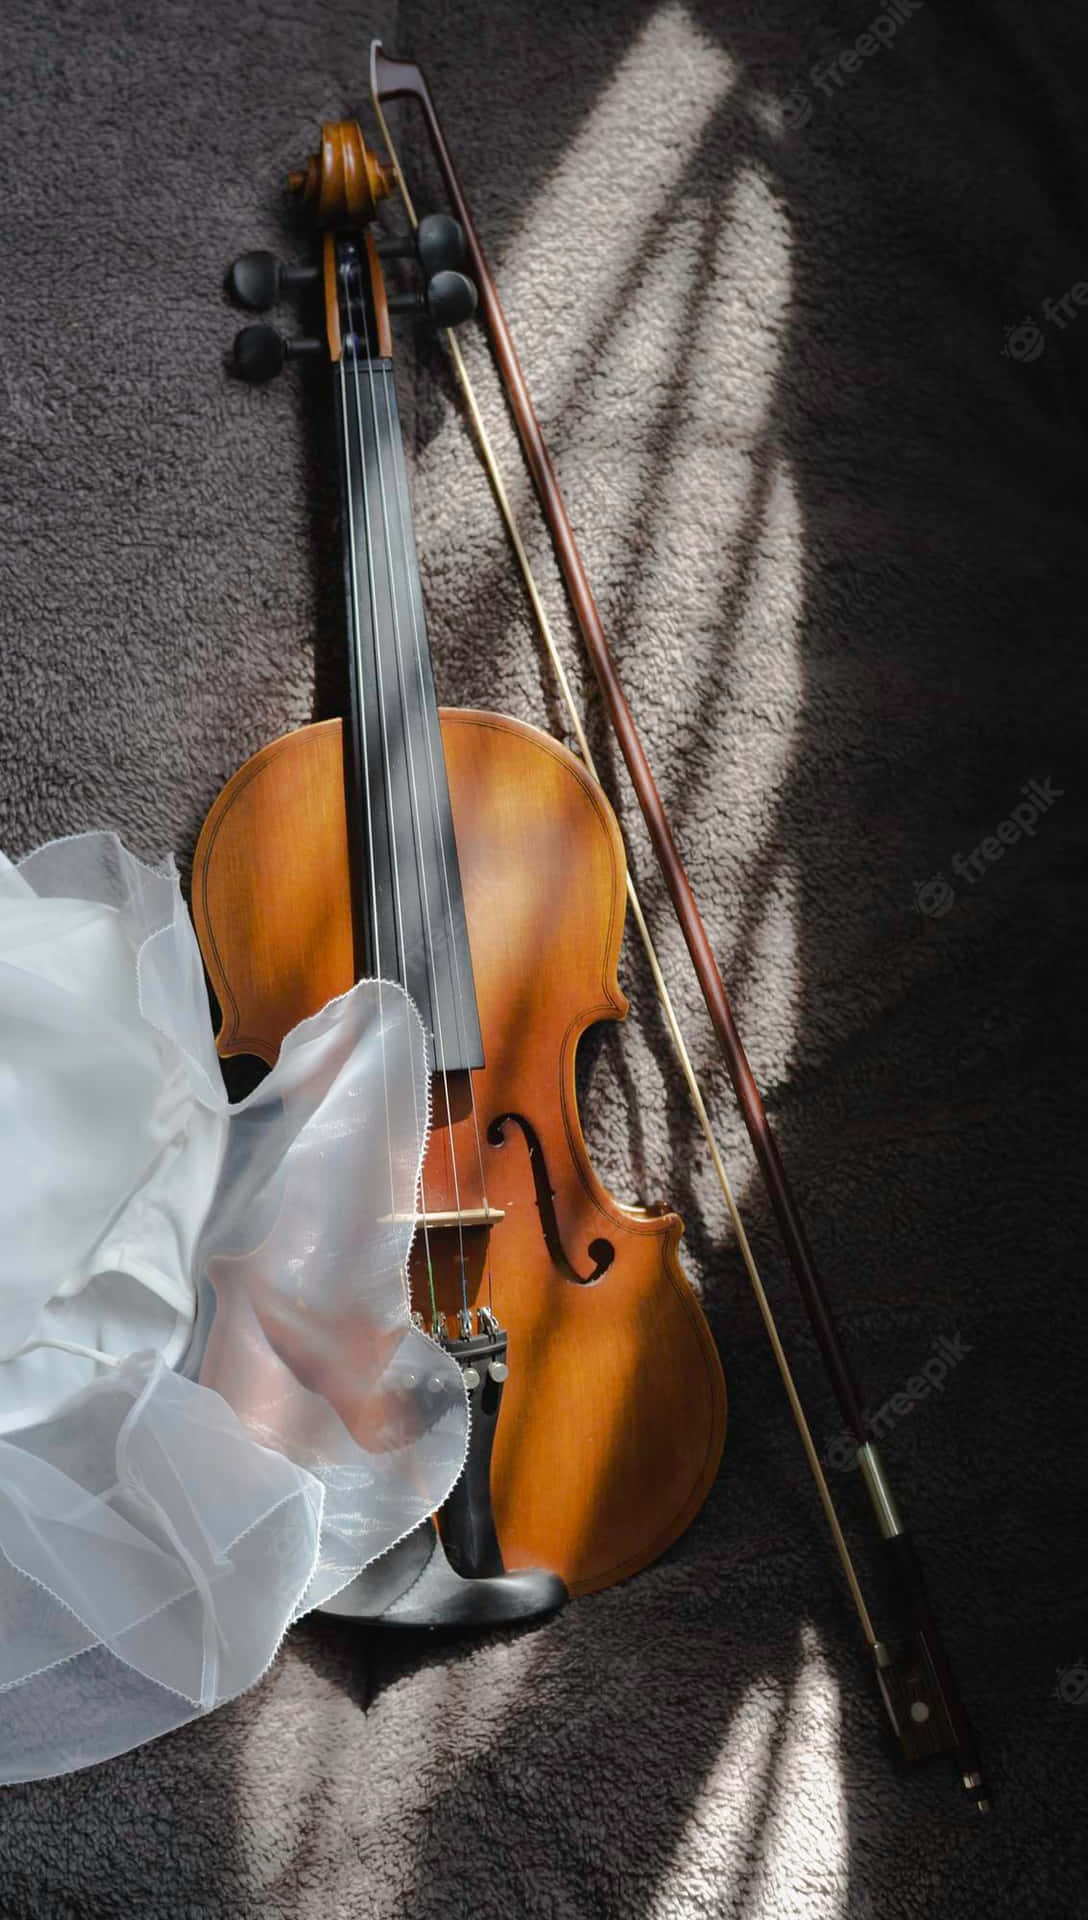 Violin And Bow On Carpet Picture